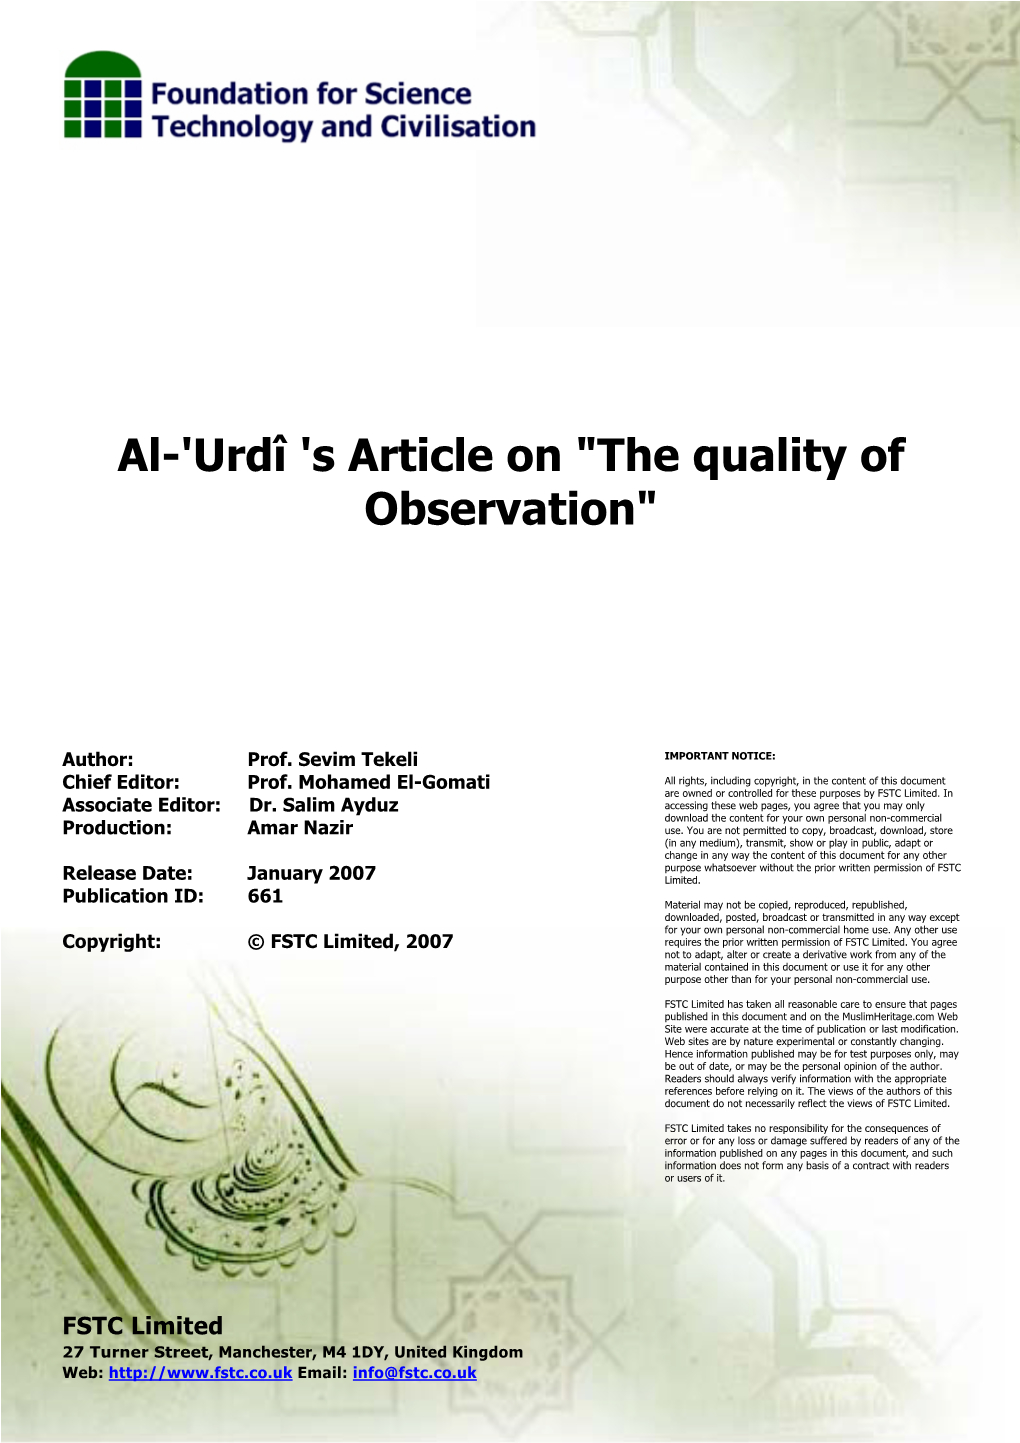 Al-'Urdī 'S Article on "The Quality of Observation"